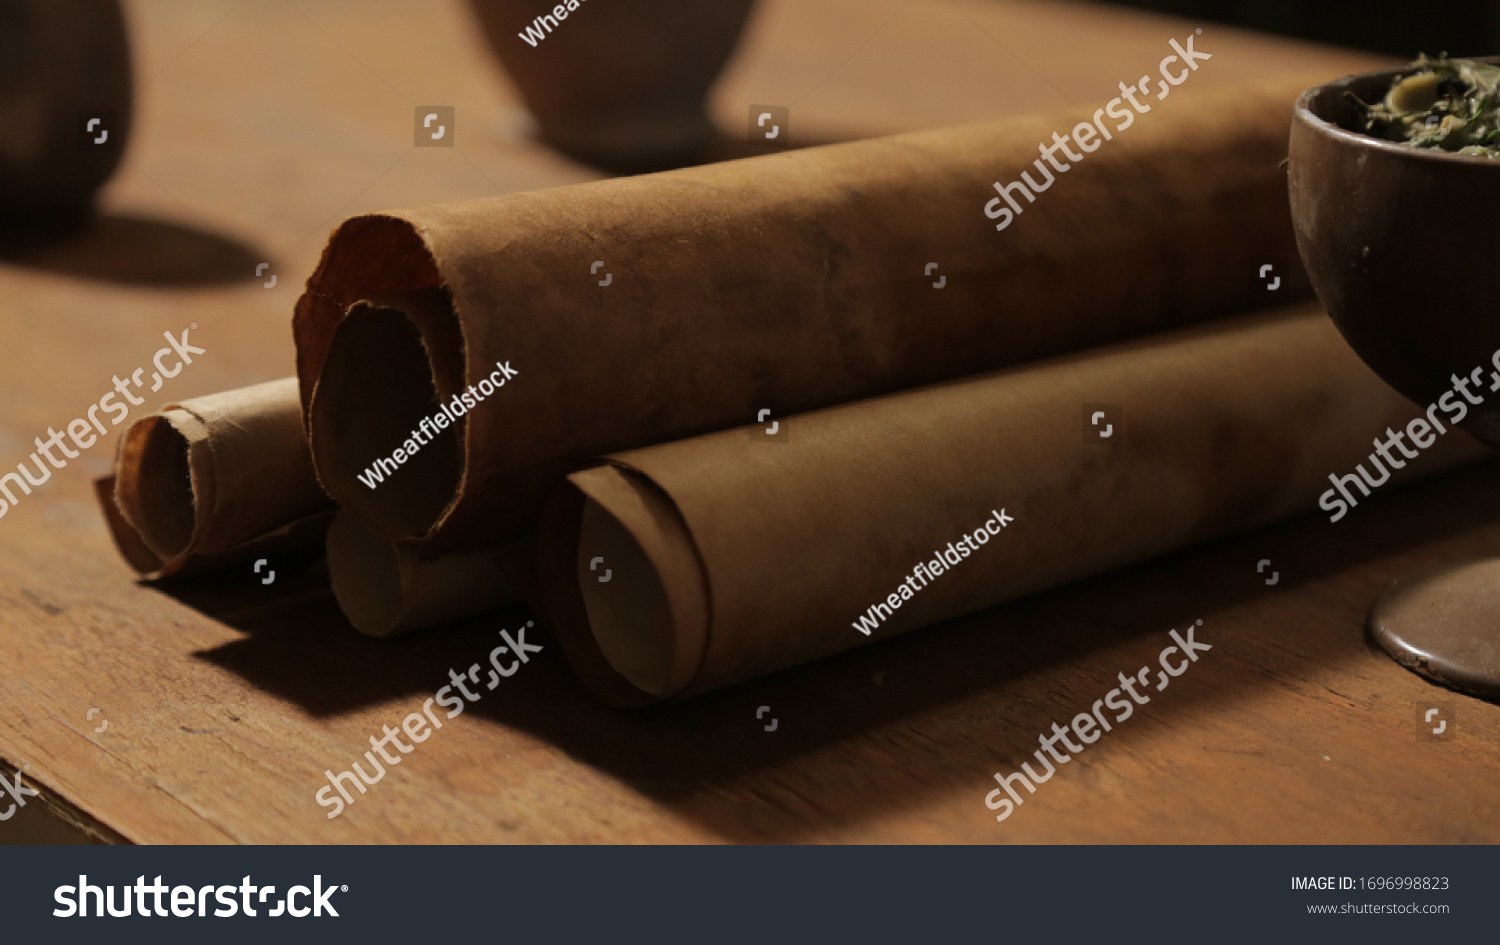 Bible scene: a wooden dining table with scripture scrolls. Close-up of rolls of old paper, cup with food. #1696998823